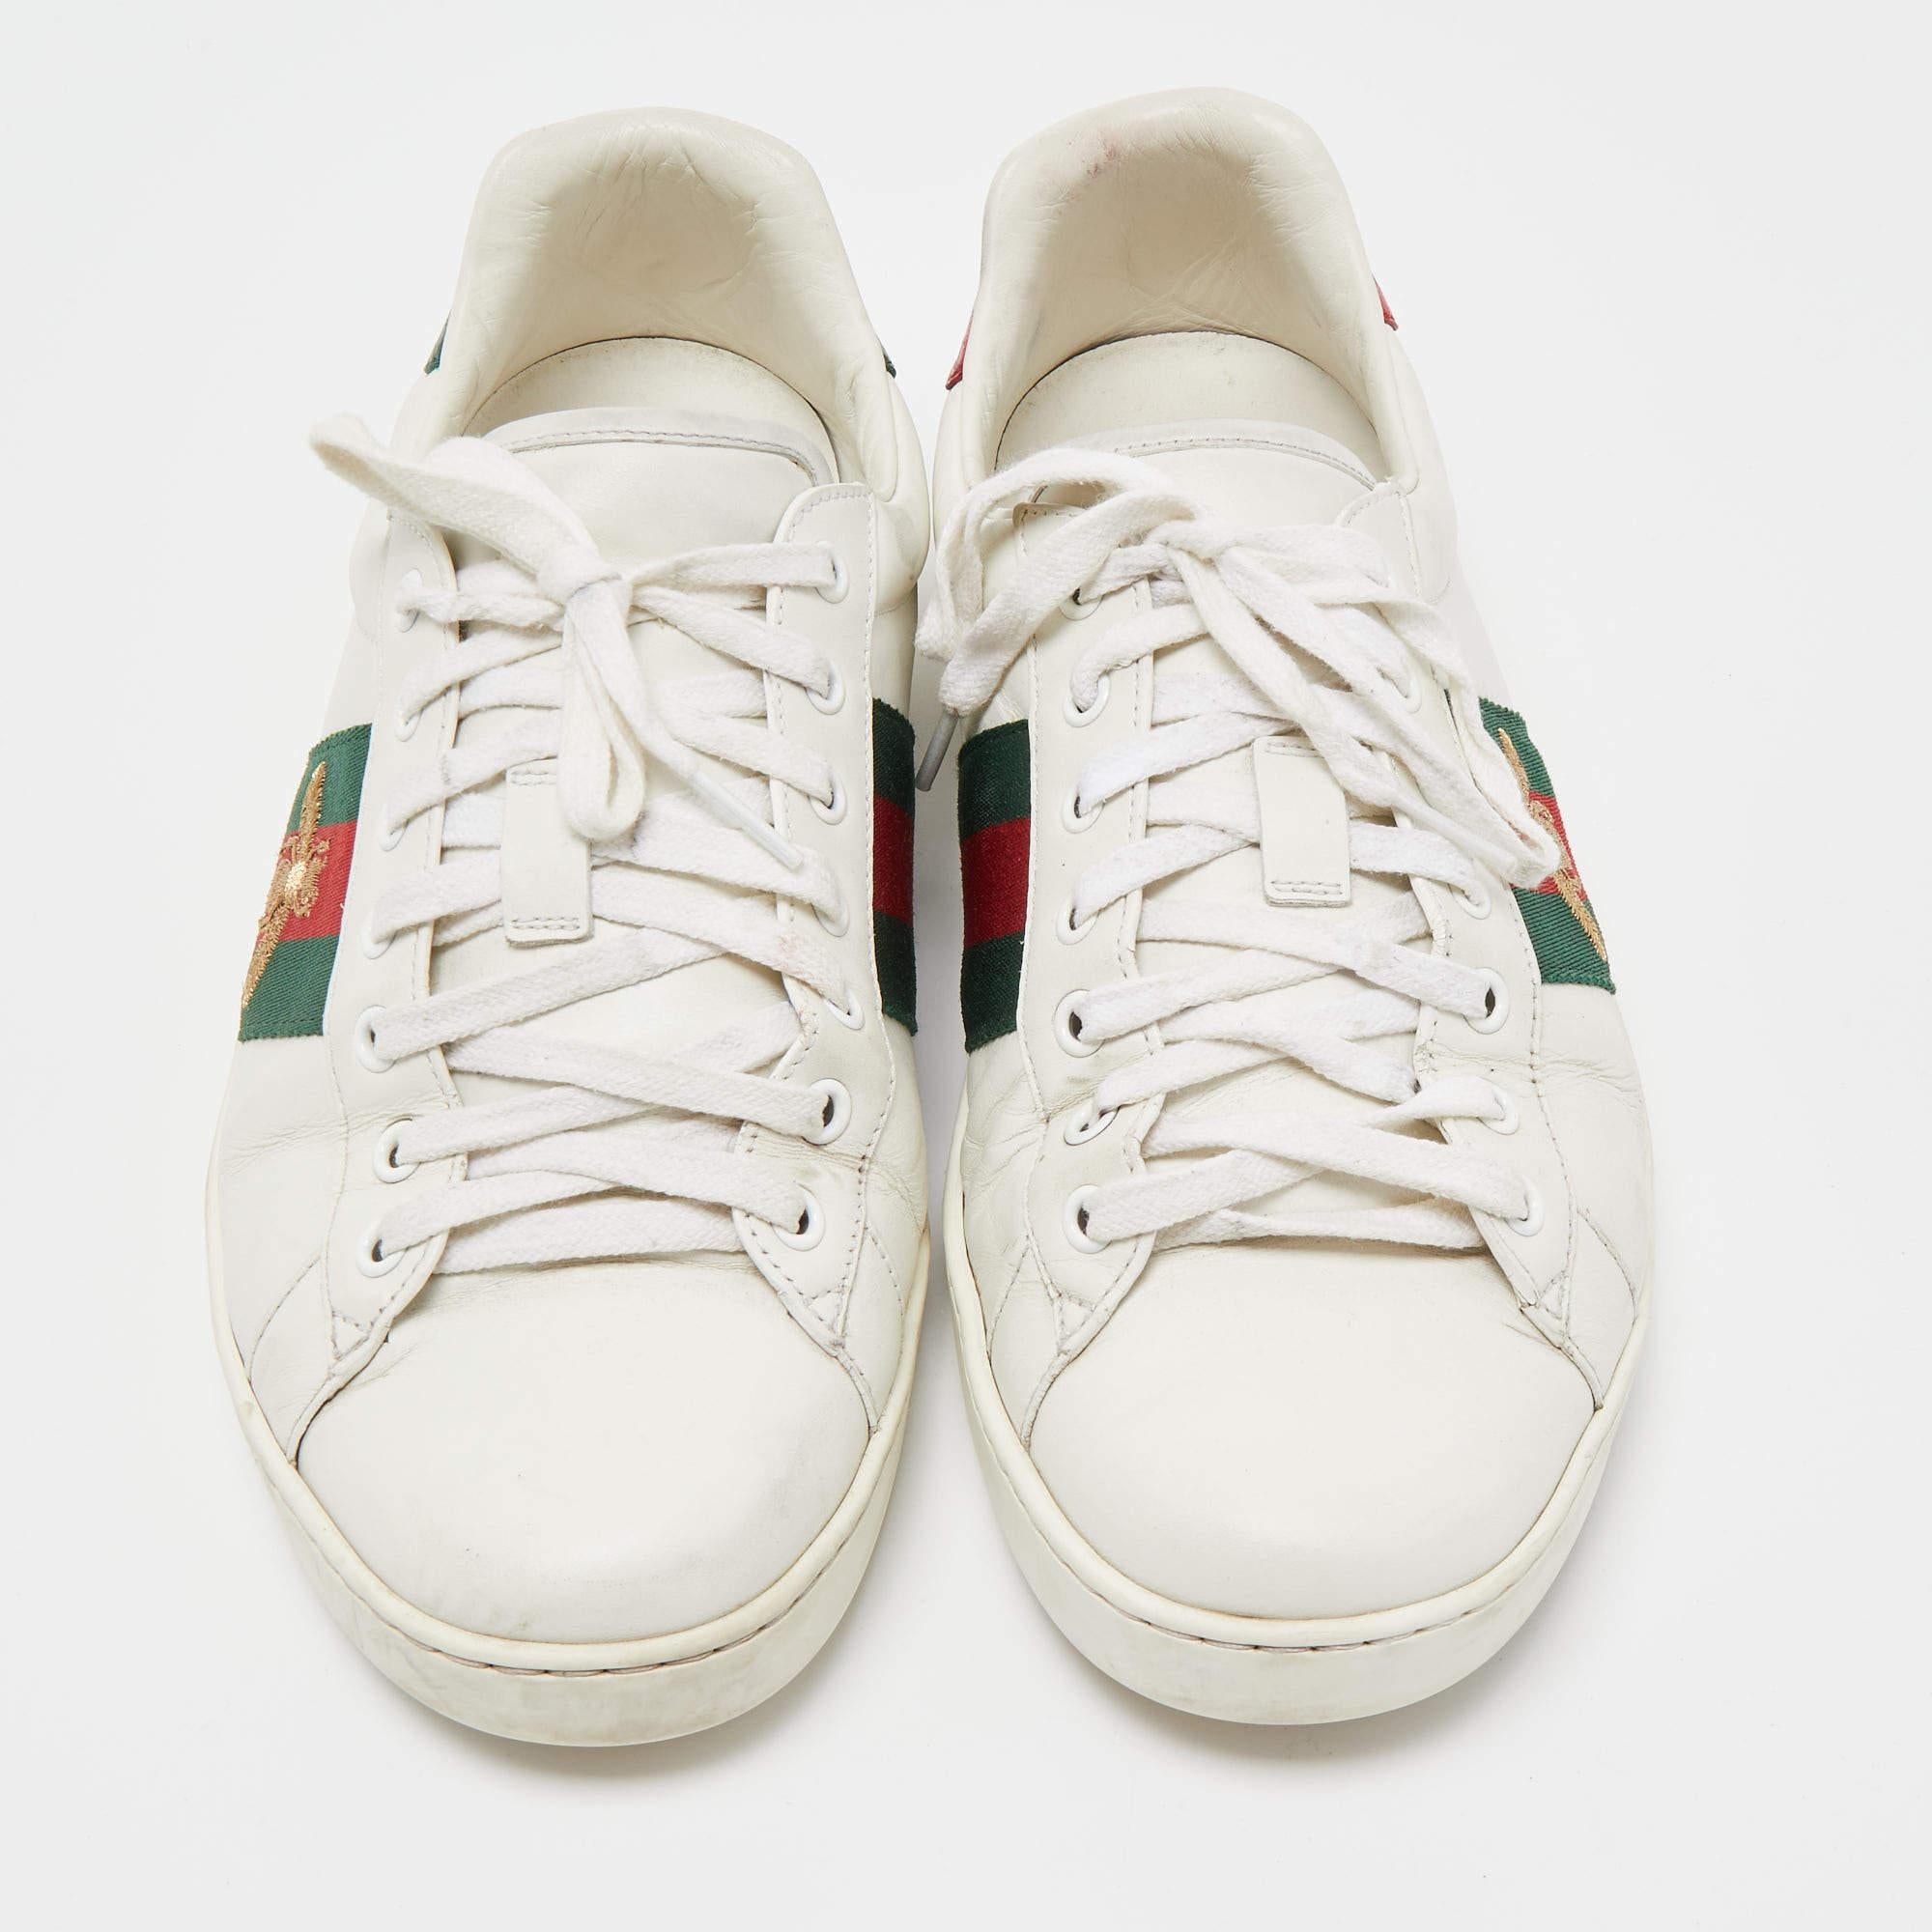 Gucci White Leather Embroidered Bee Ace Sneakers Size 43 1